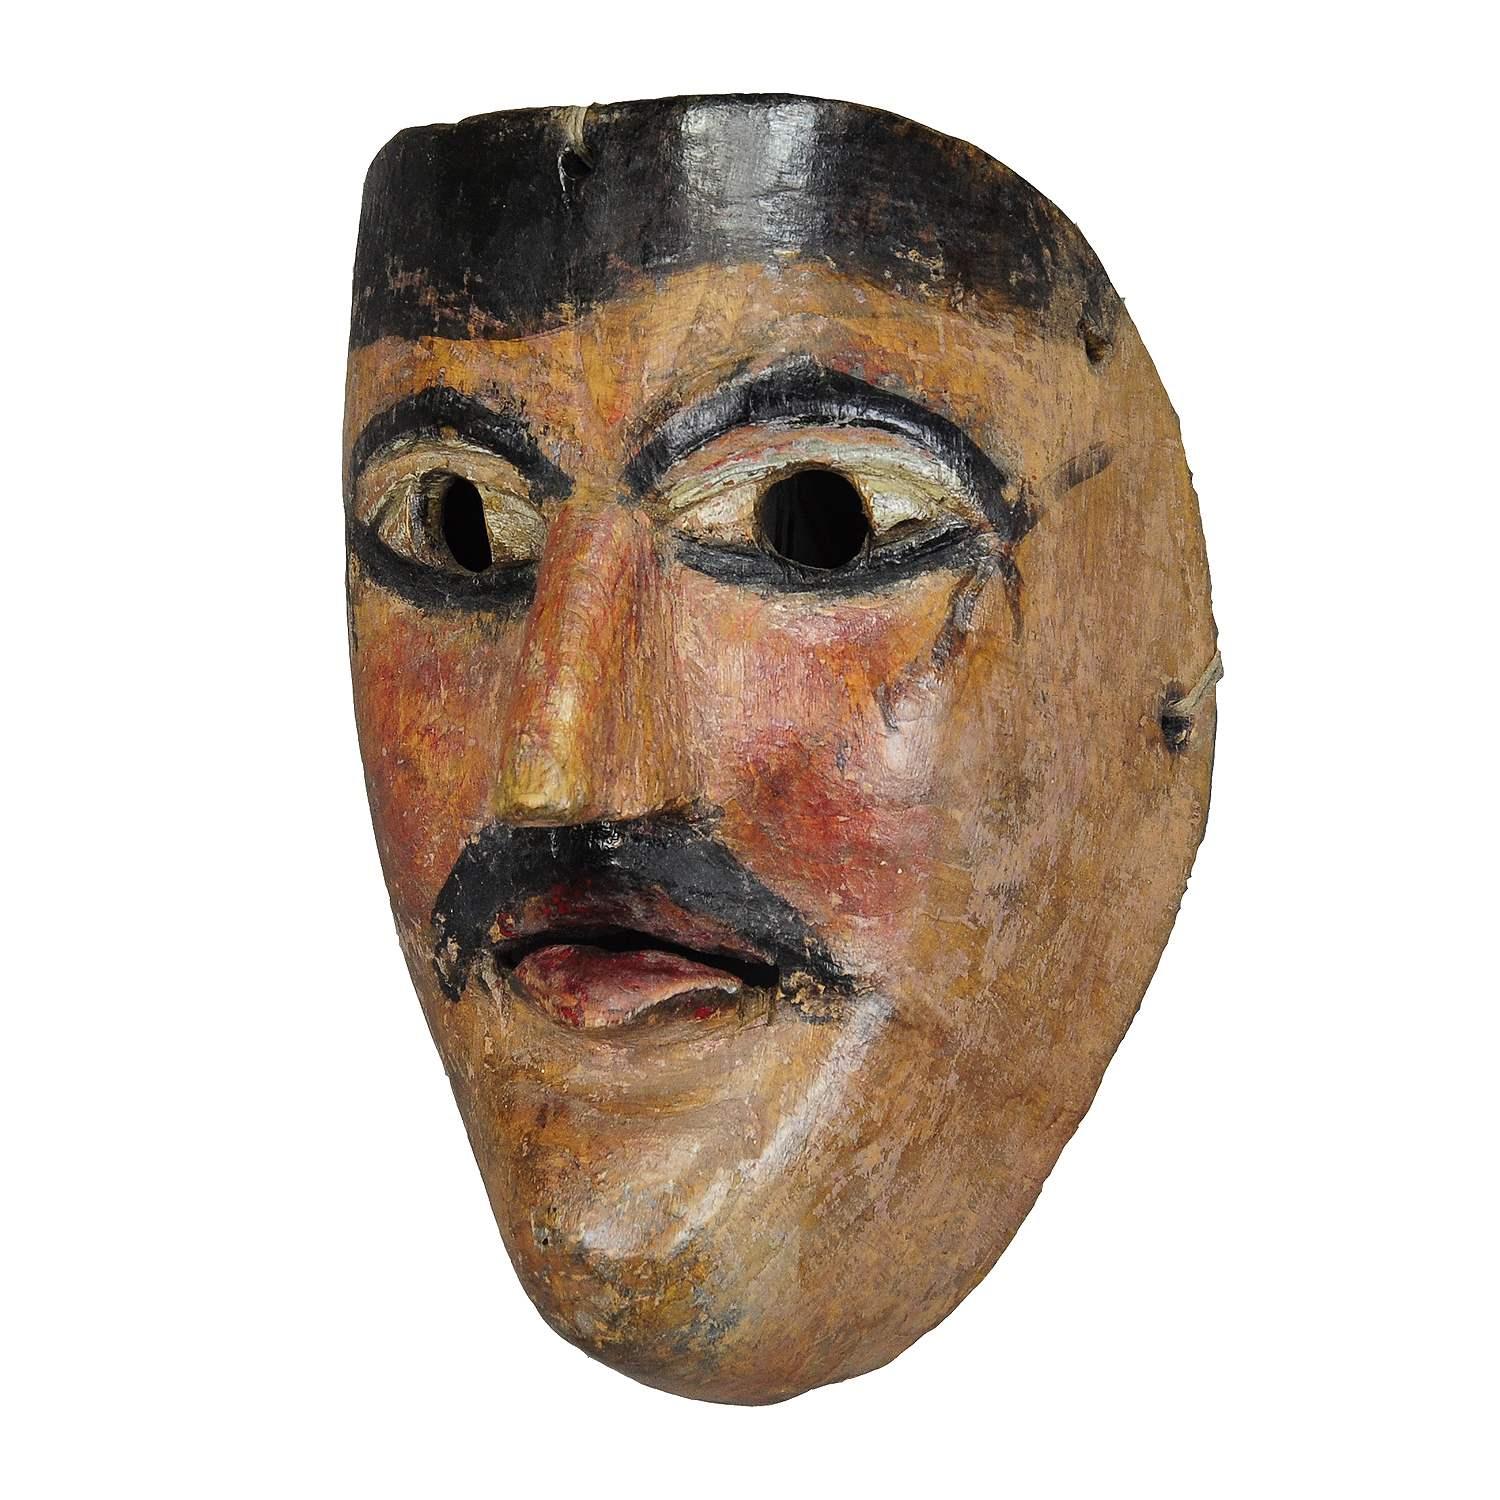 Nice Carved and Painted Tyrolian Carnival Fasnet Mask

A handcarved pine wood, hand painted, antique wooden carved carnival mask from the region of South Tyrol. Excecuted in the first half 20th. century. These masks are used in Austria, South